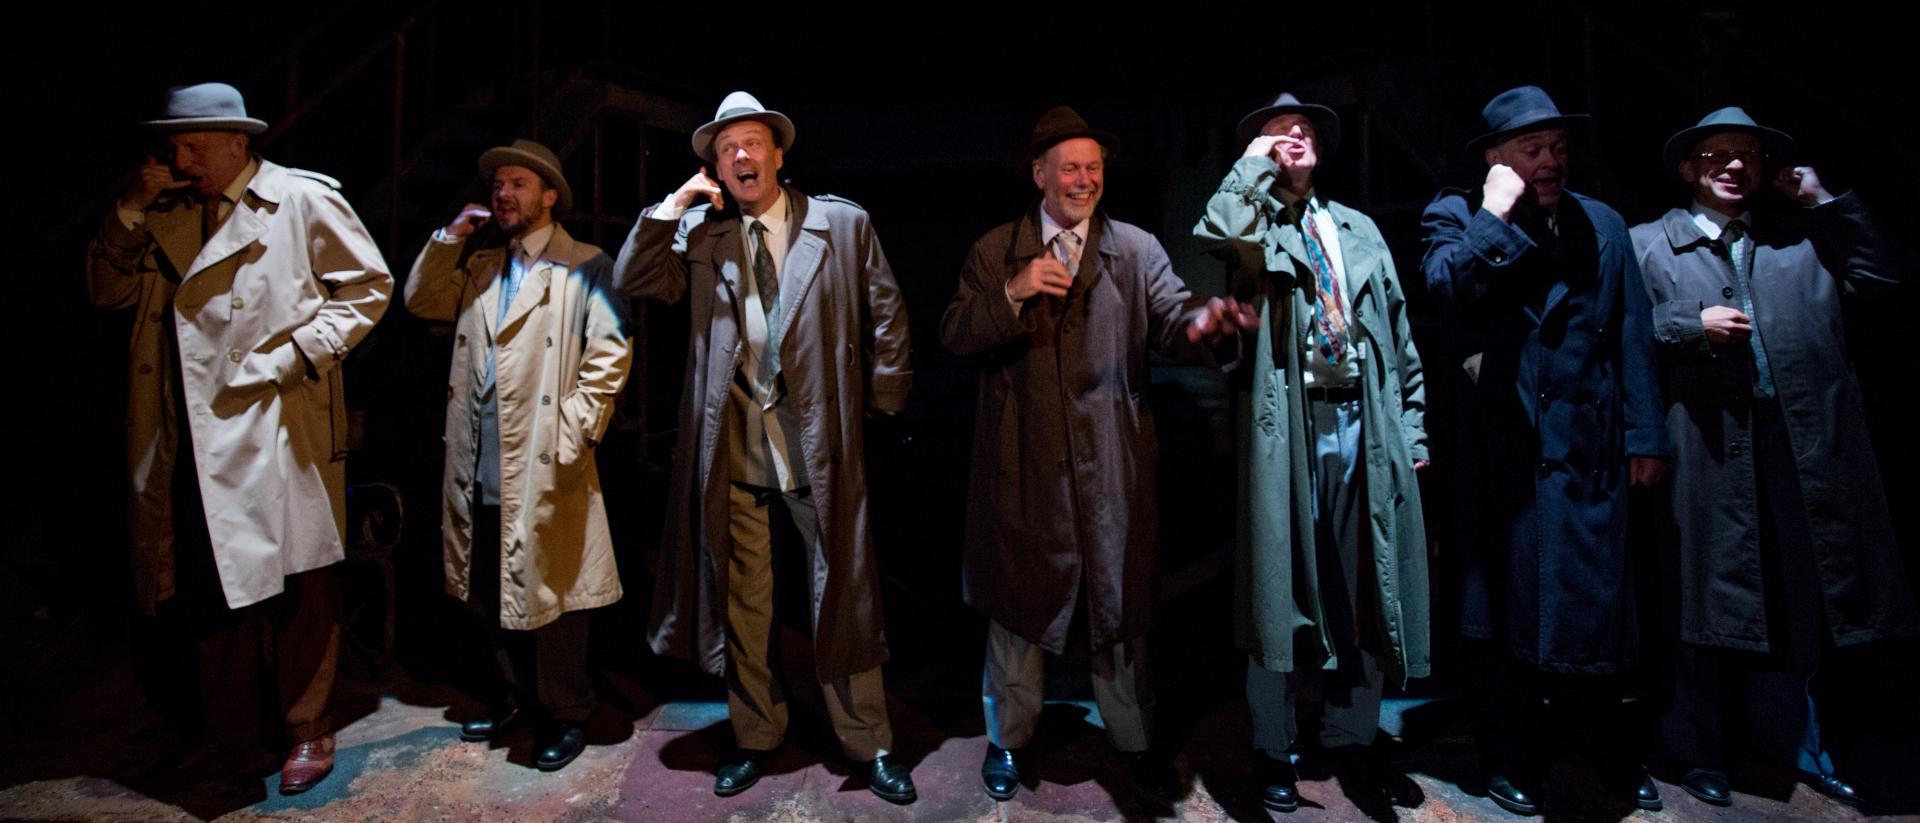 Seven men in coats and hats stand in a line and mime making a phone call. They are atmospherically lit.